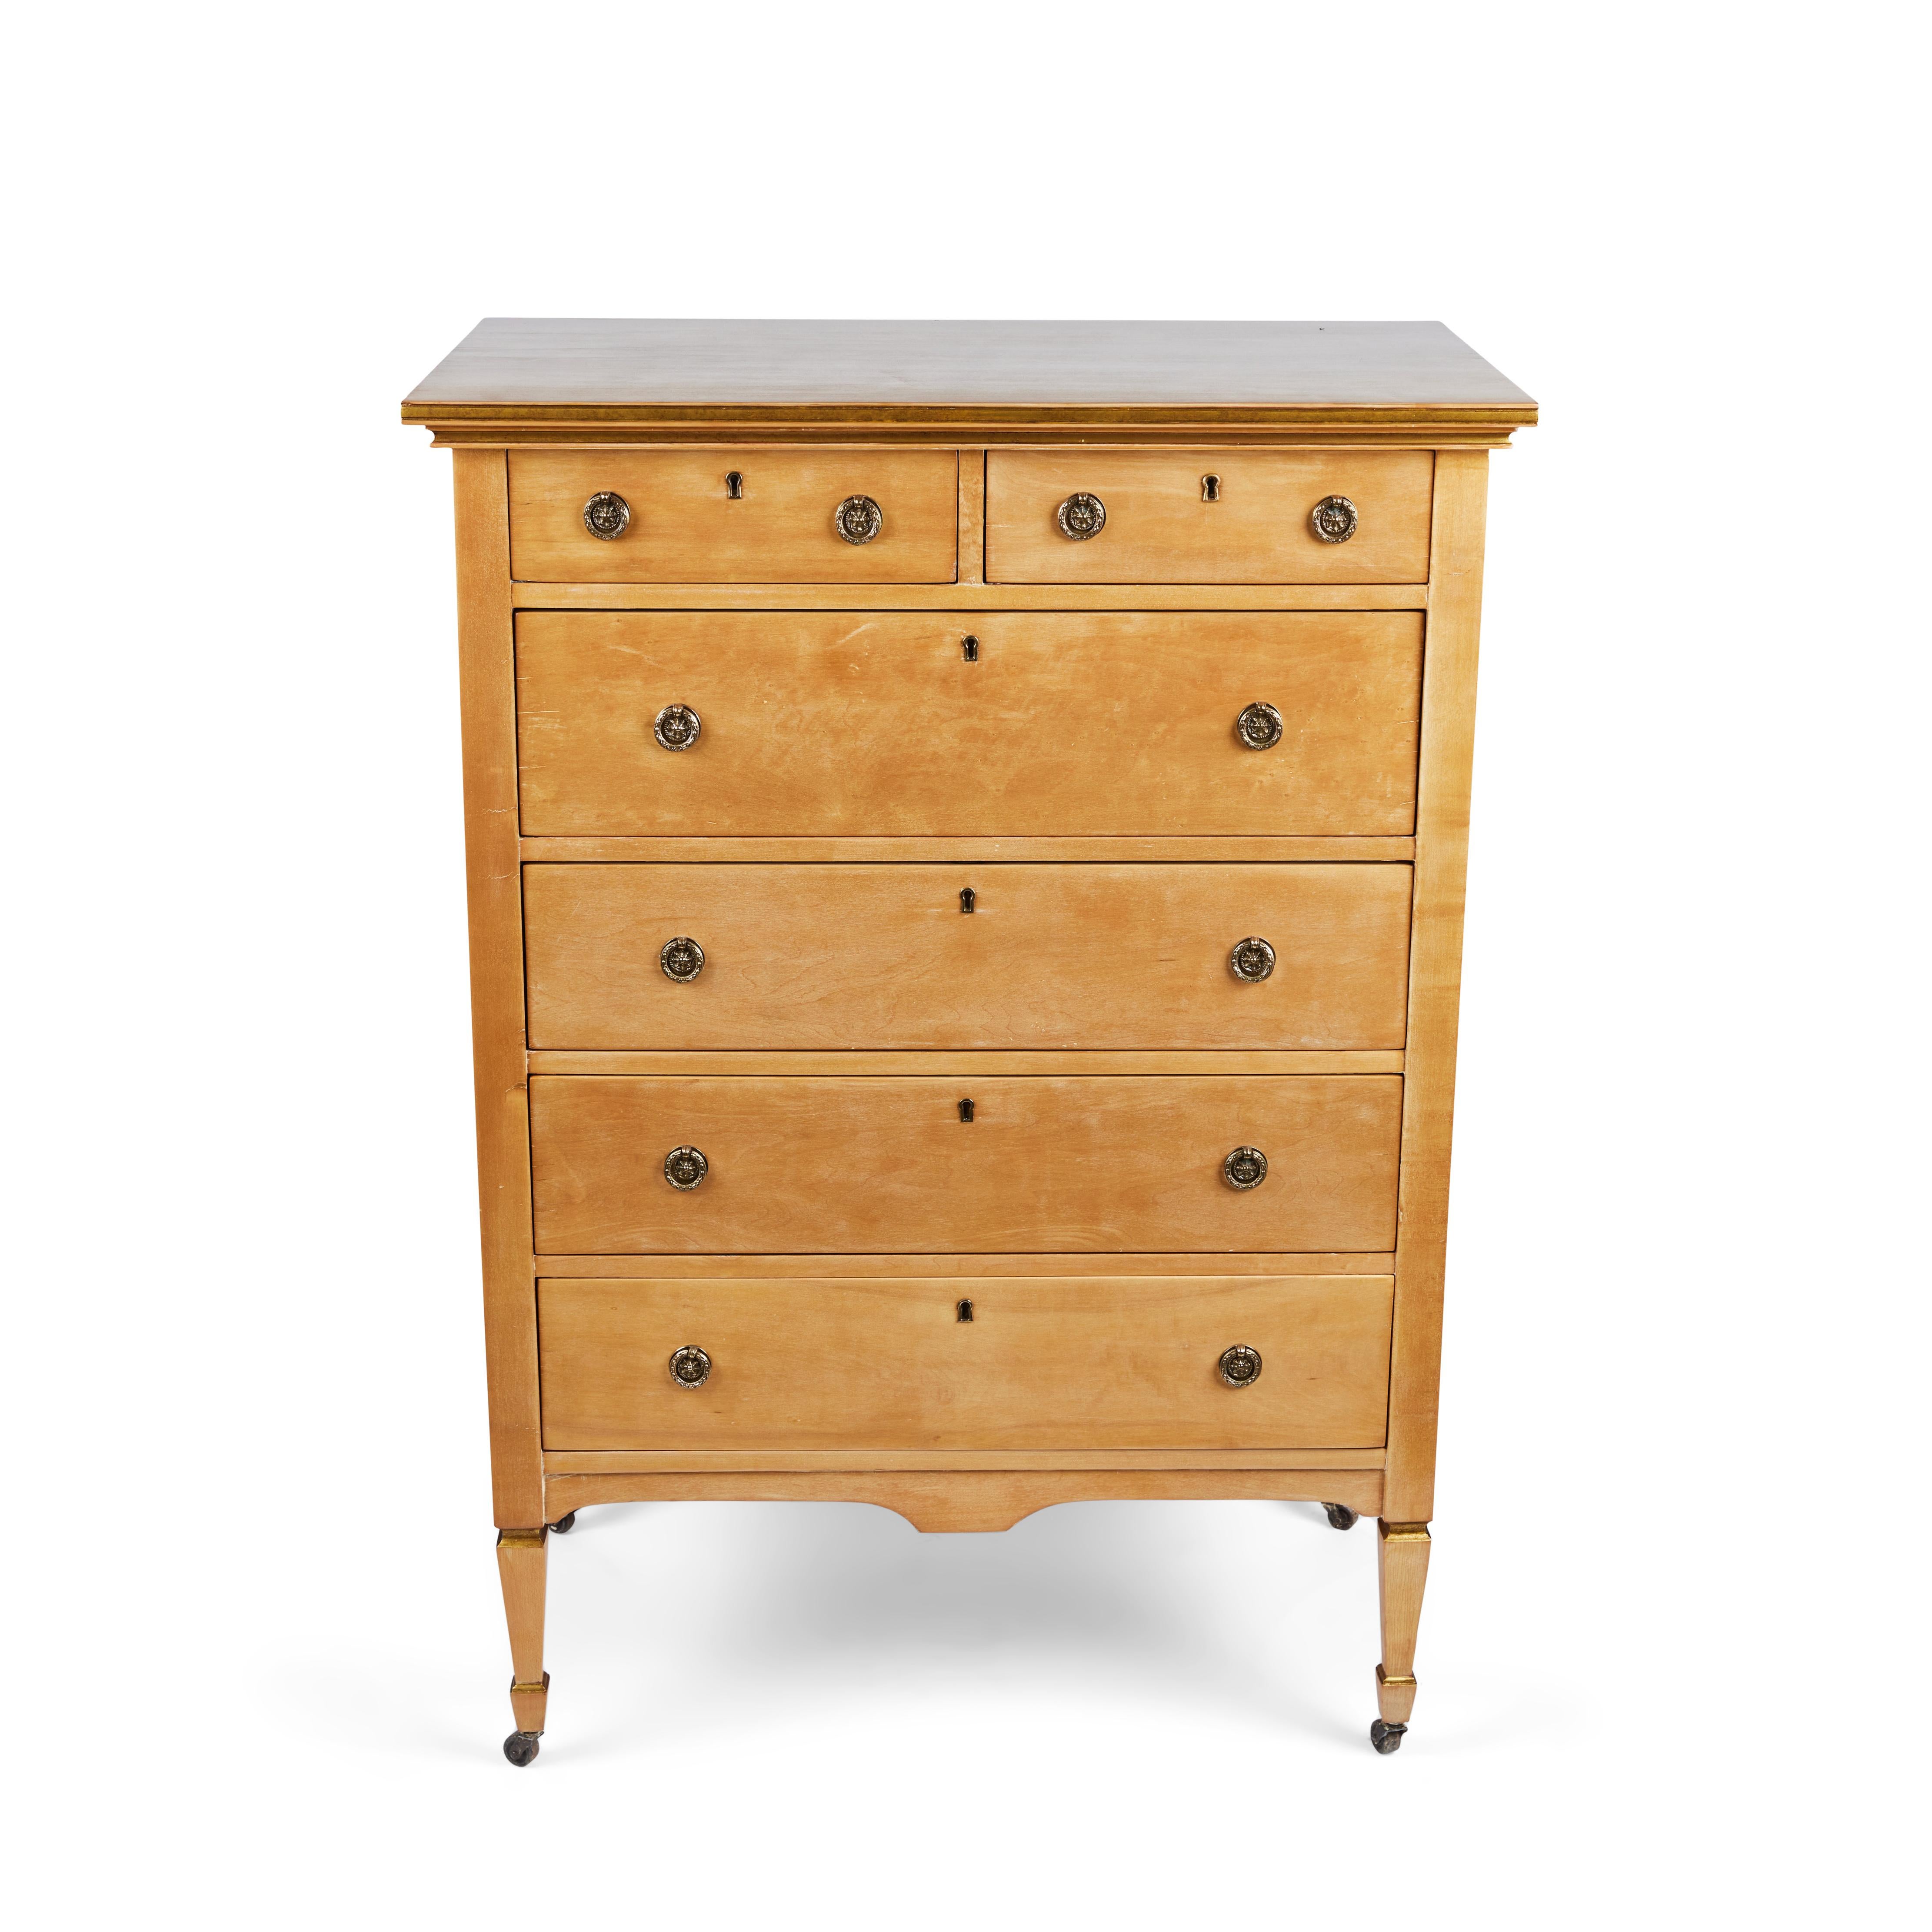 Vintage classic bird's eye maple dresser with decorative original brass pulls & casters and dovetail drawers. It has been newly restored and attractive antique gold details have been added.